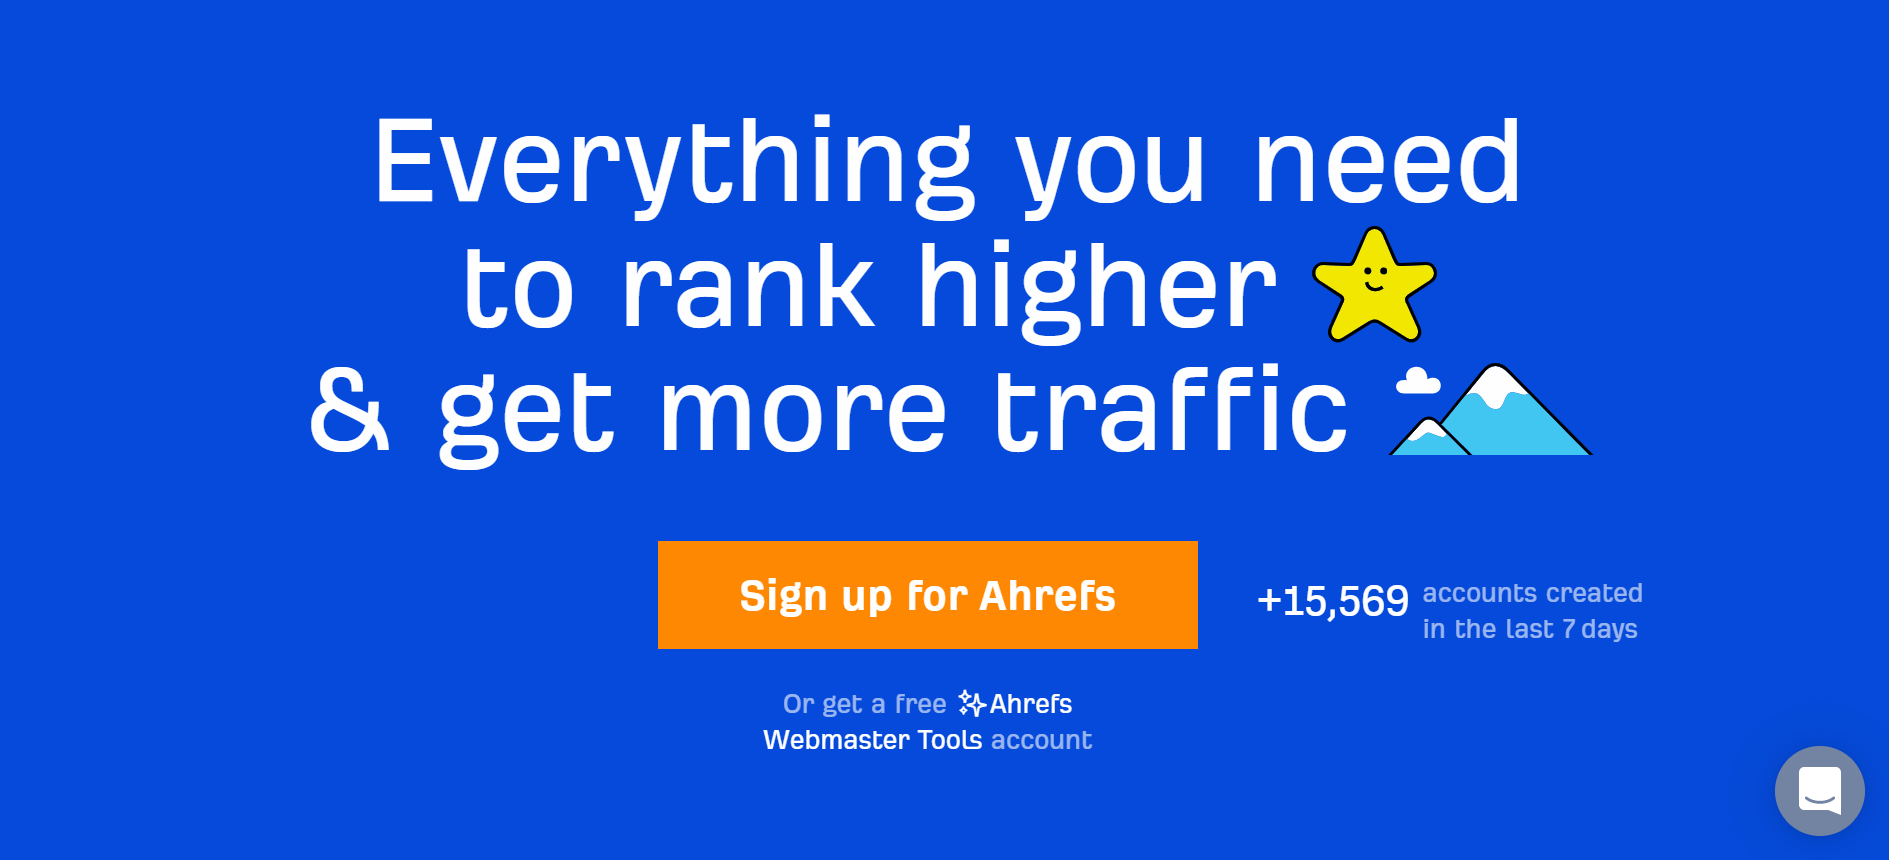 Ahrefs displays how many new accounts were created in the last week